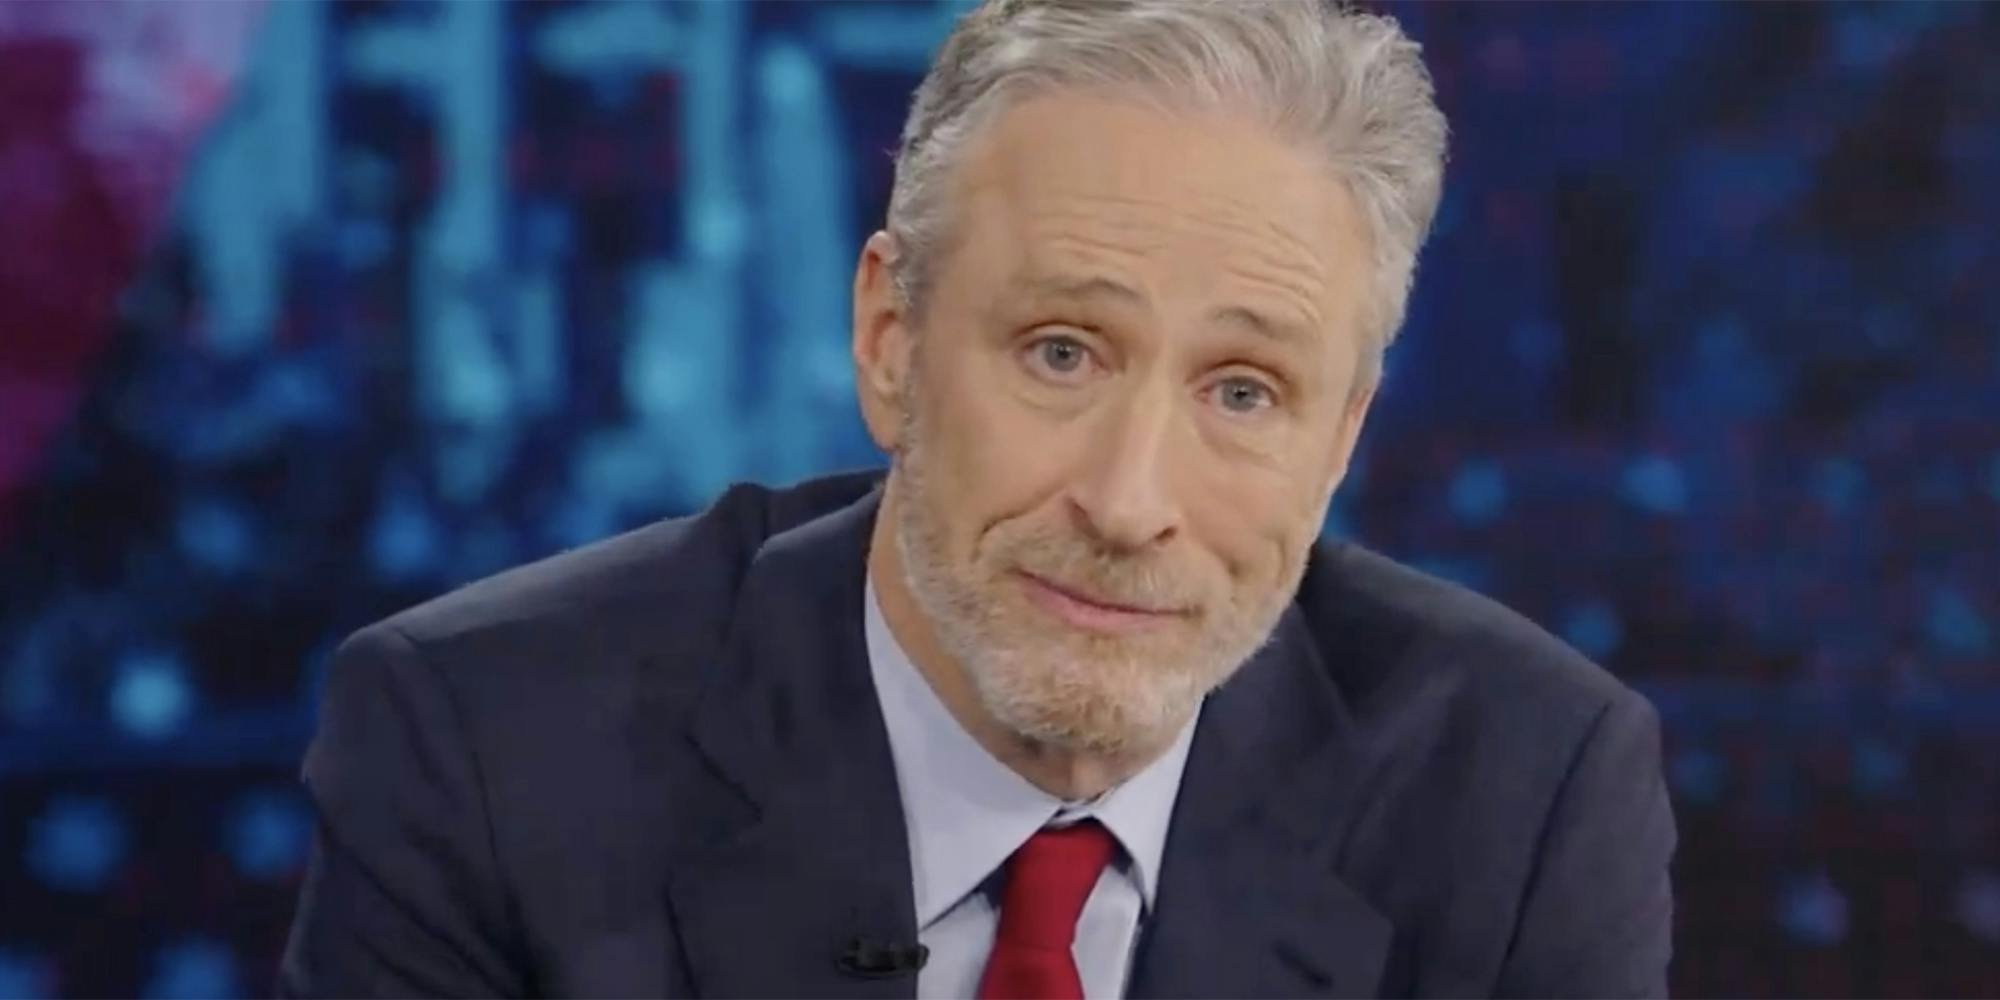 Jon Stewart's Daily Show Return Outraged His Loyal Viewers By Calling Out Biden